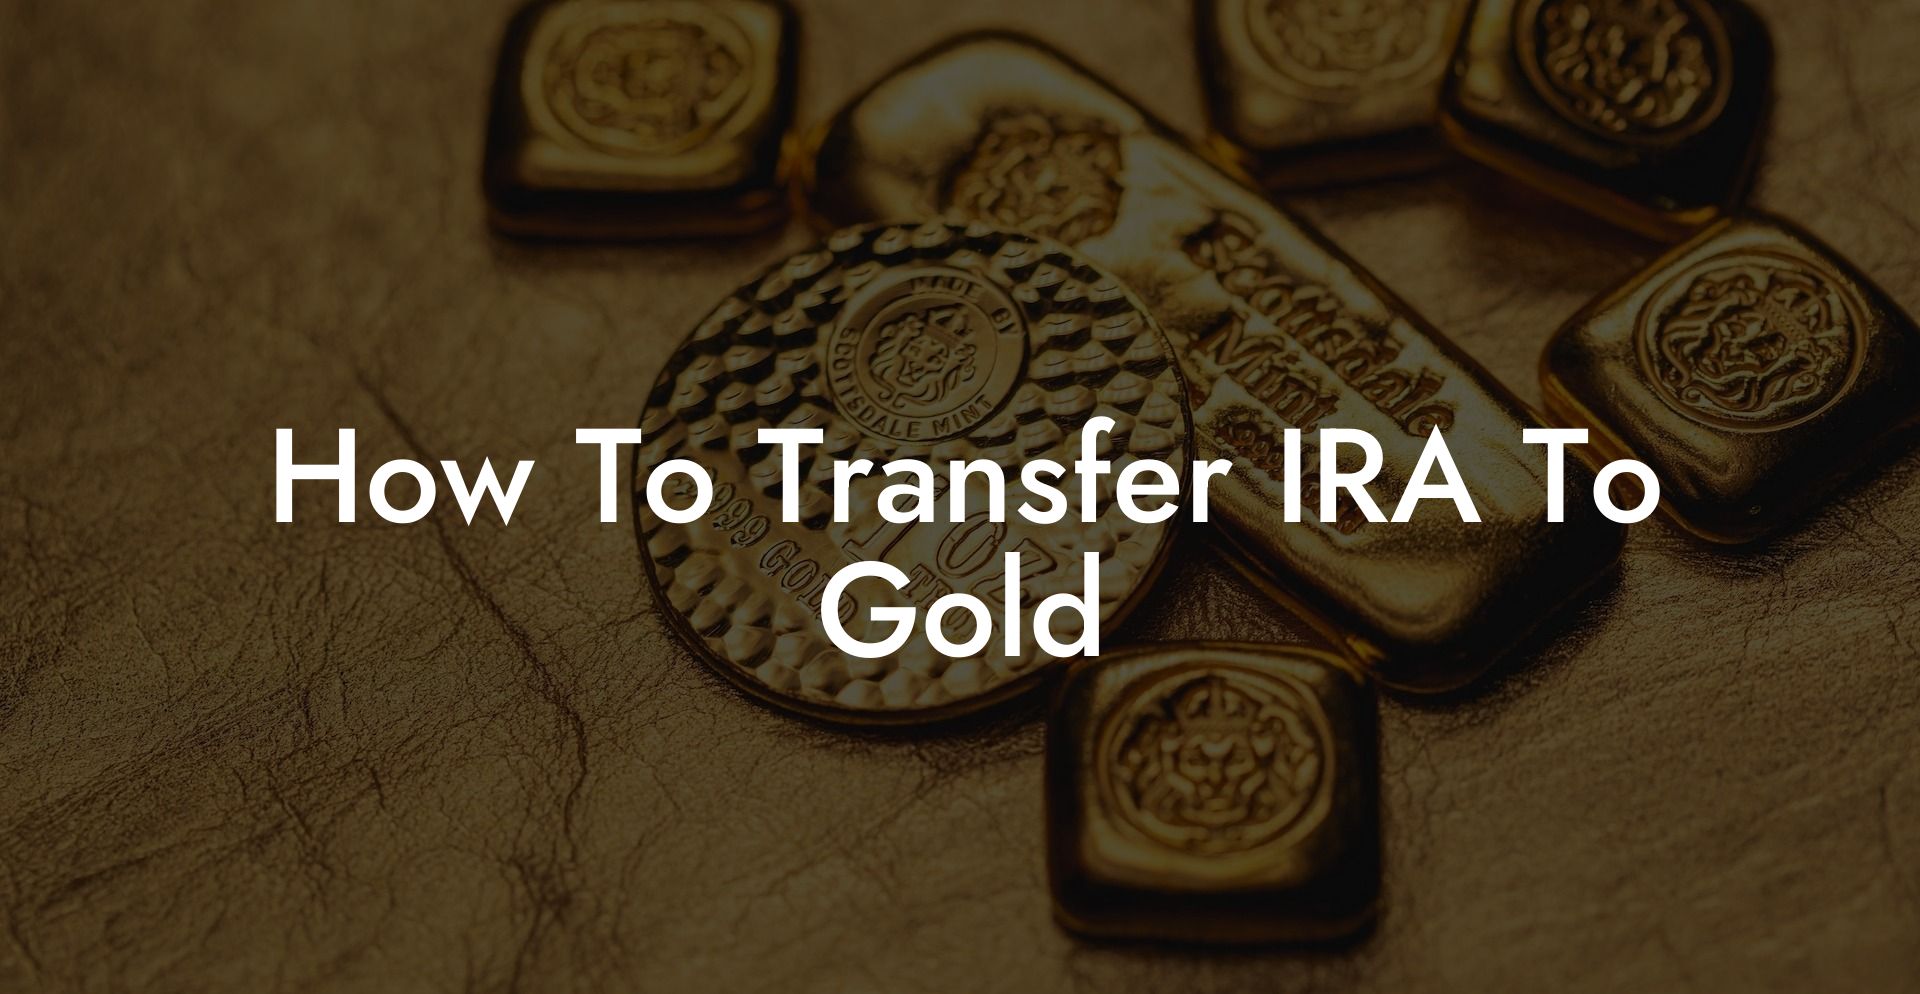 How To Transfer IRA To Gold